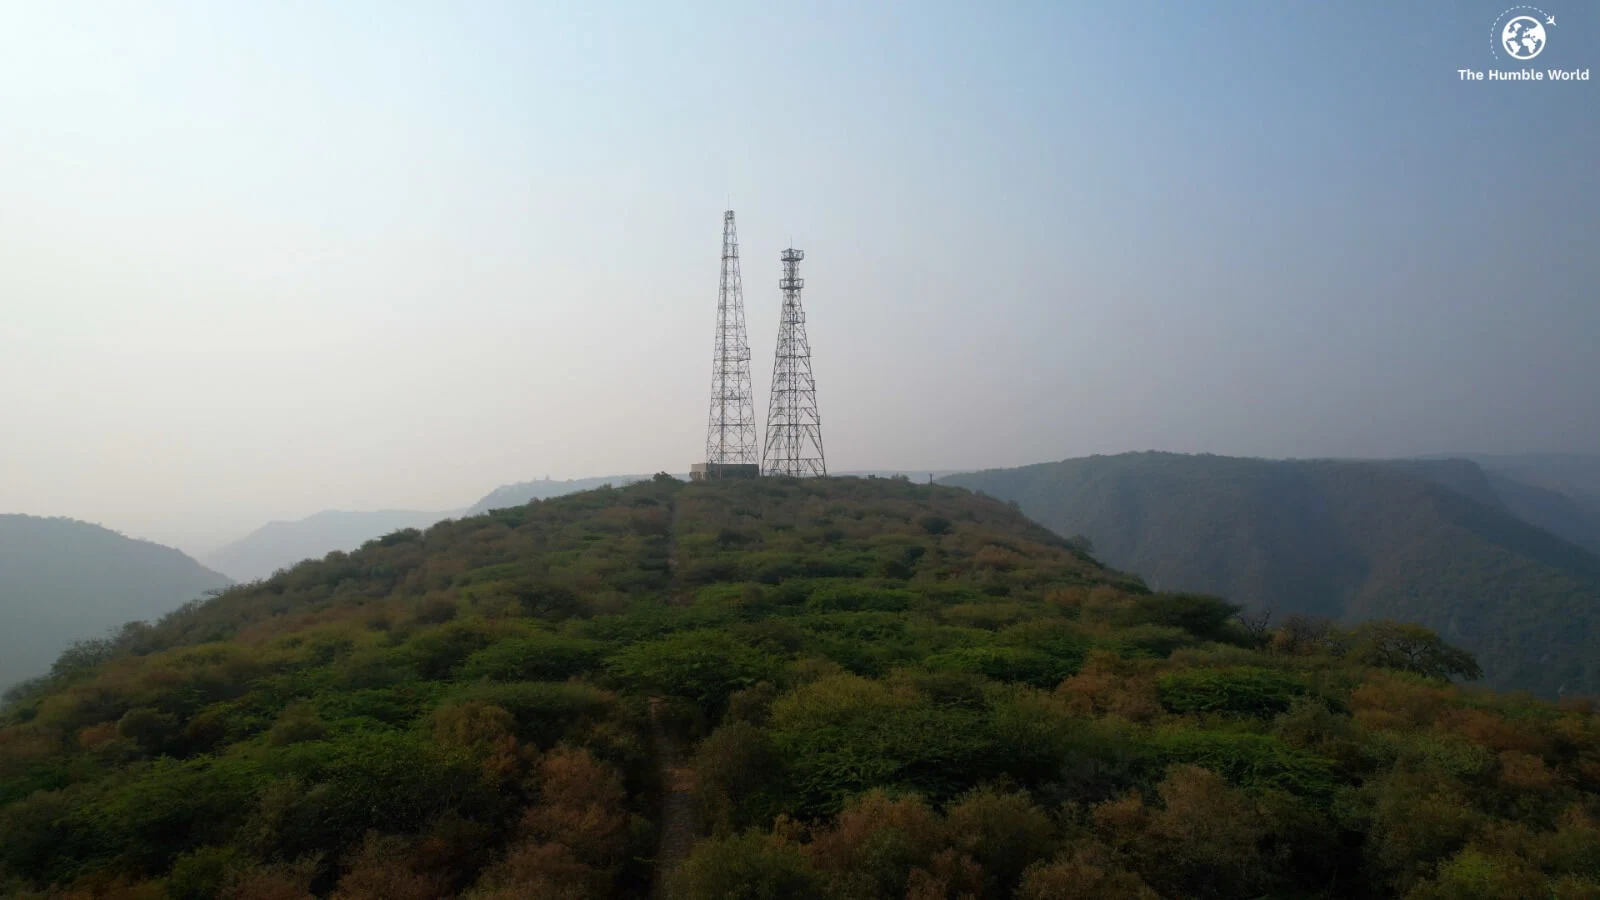 Twin Tower Broadcast Station in Jaipur